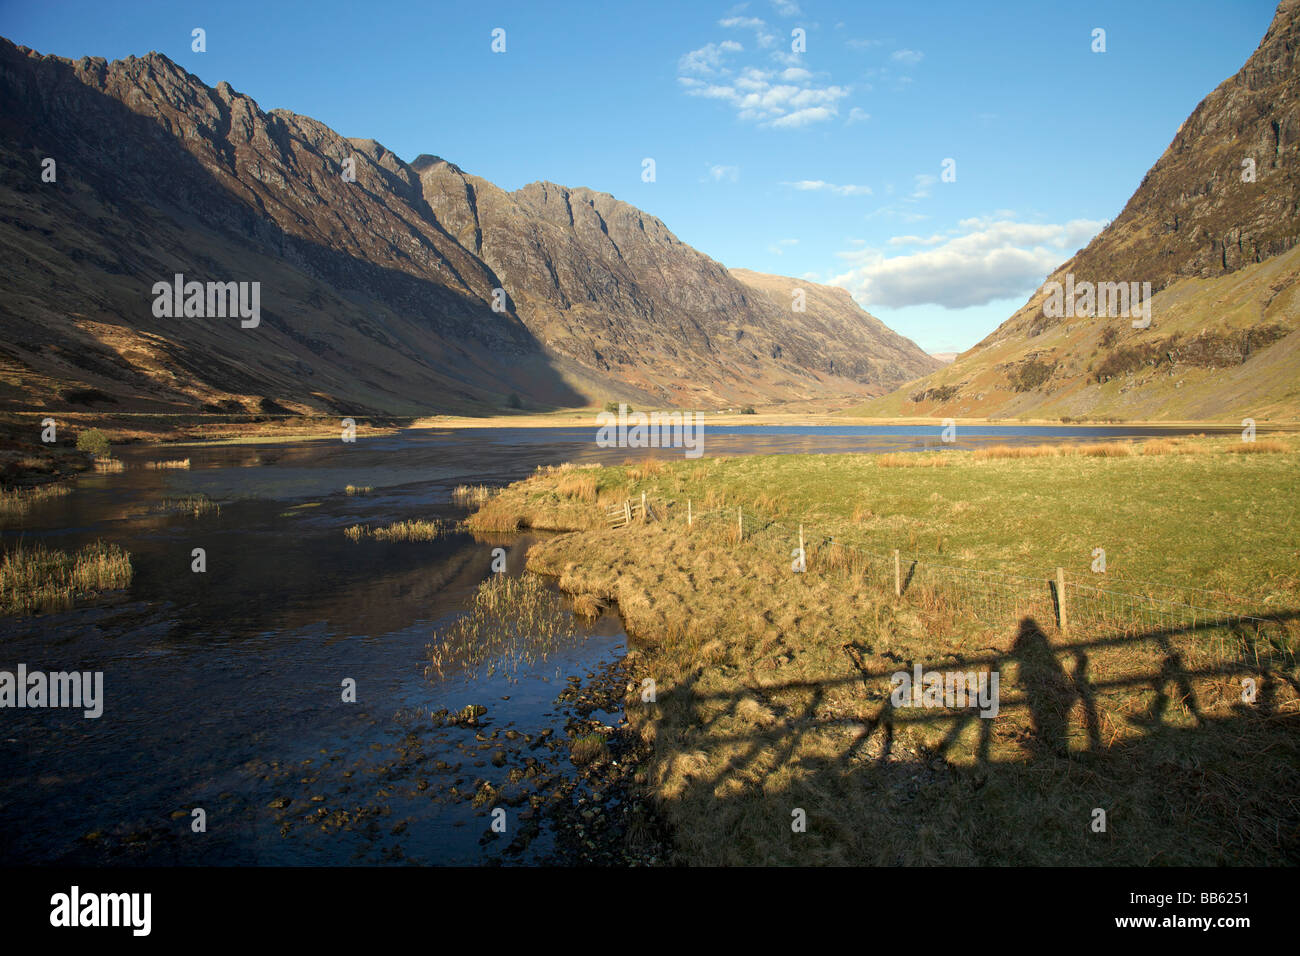 Shadow of the bridge over Loch Achtriochtan at the foot of the Pass of Glencoe in early evening sunlight Stock Photo